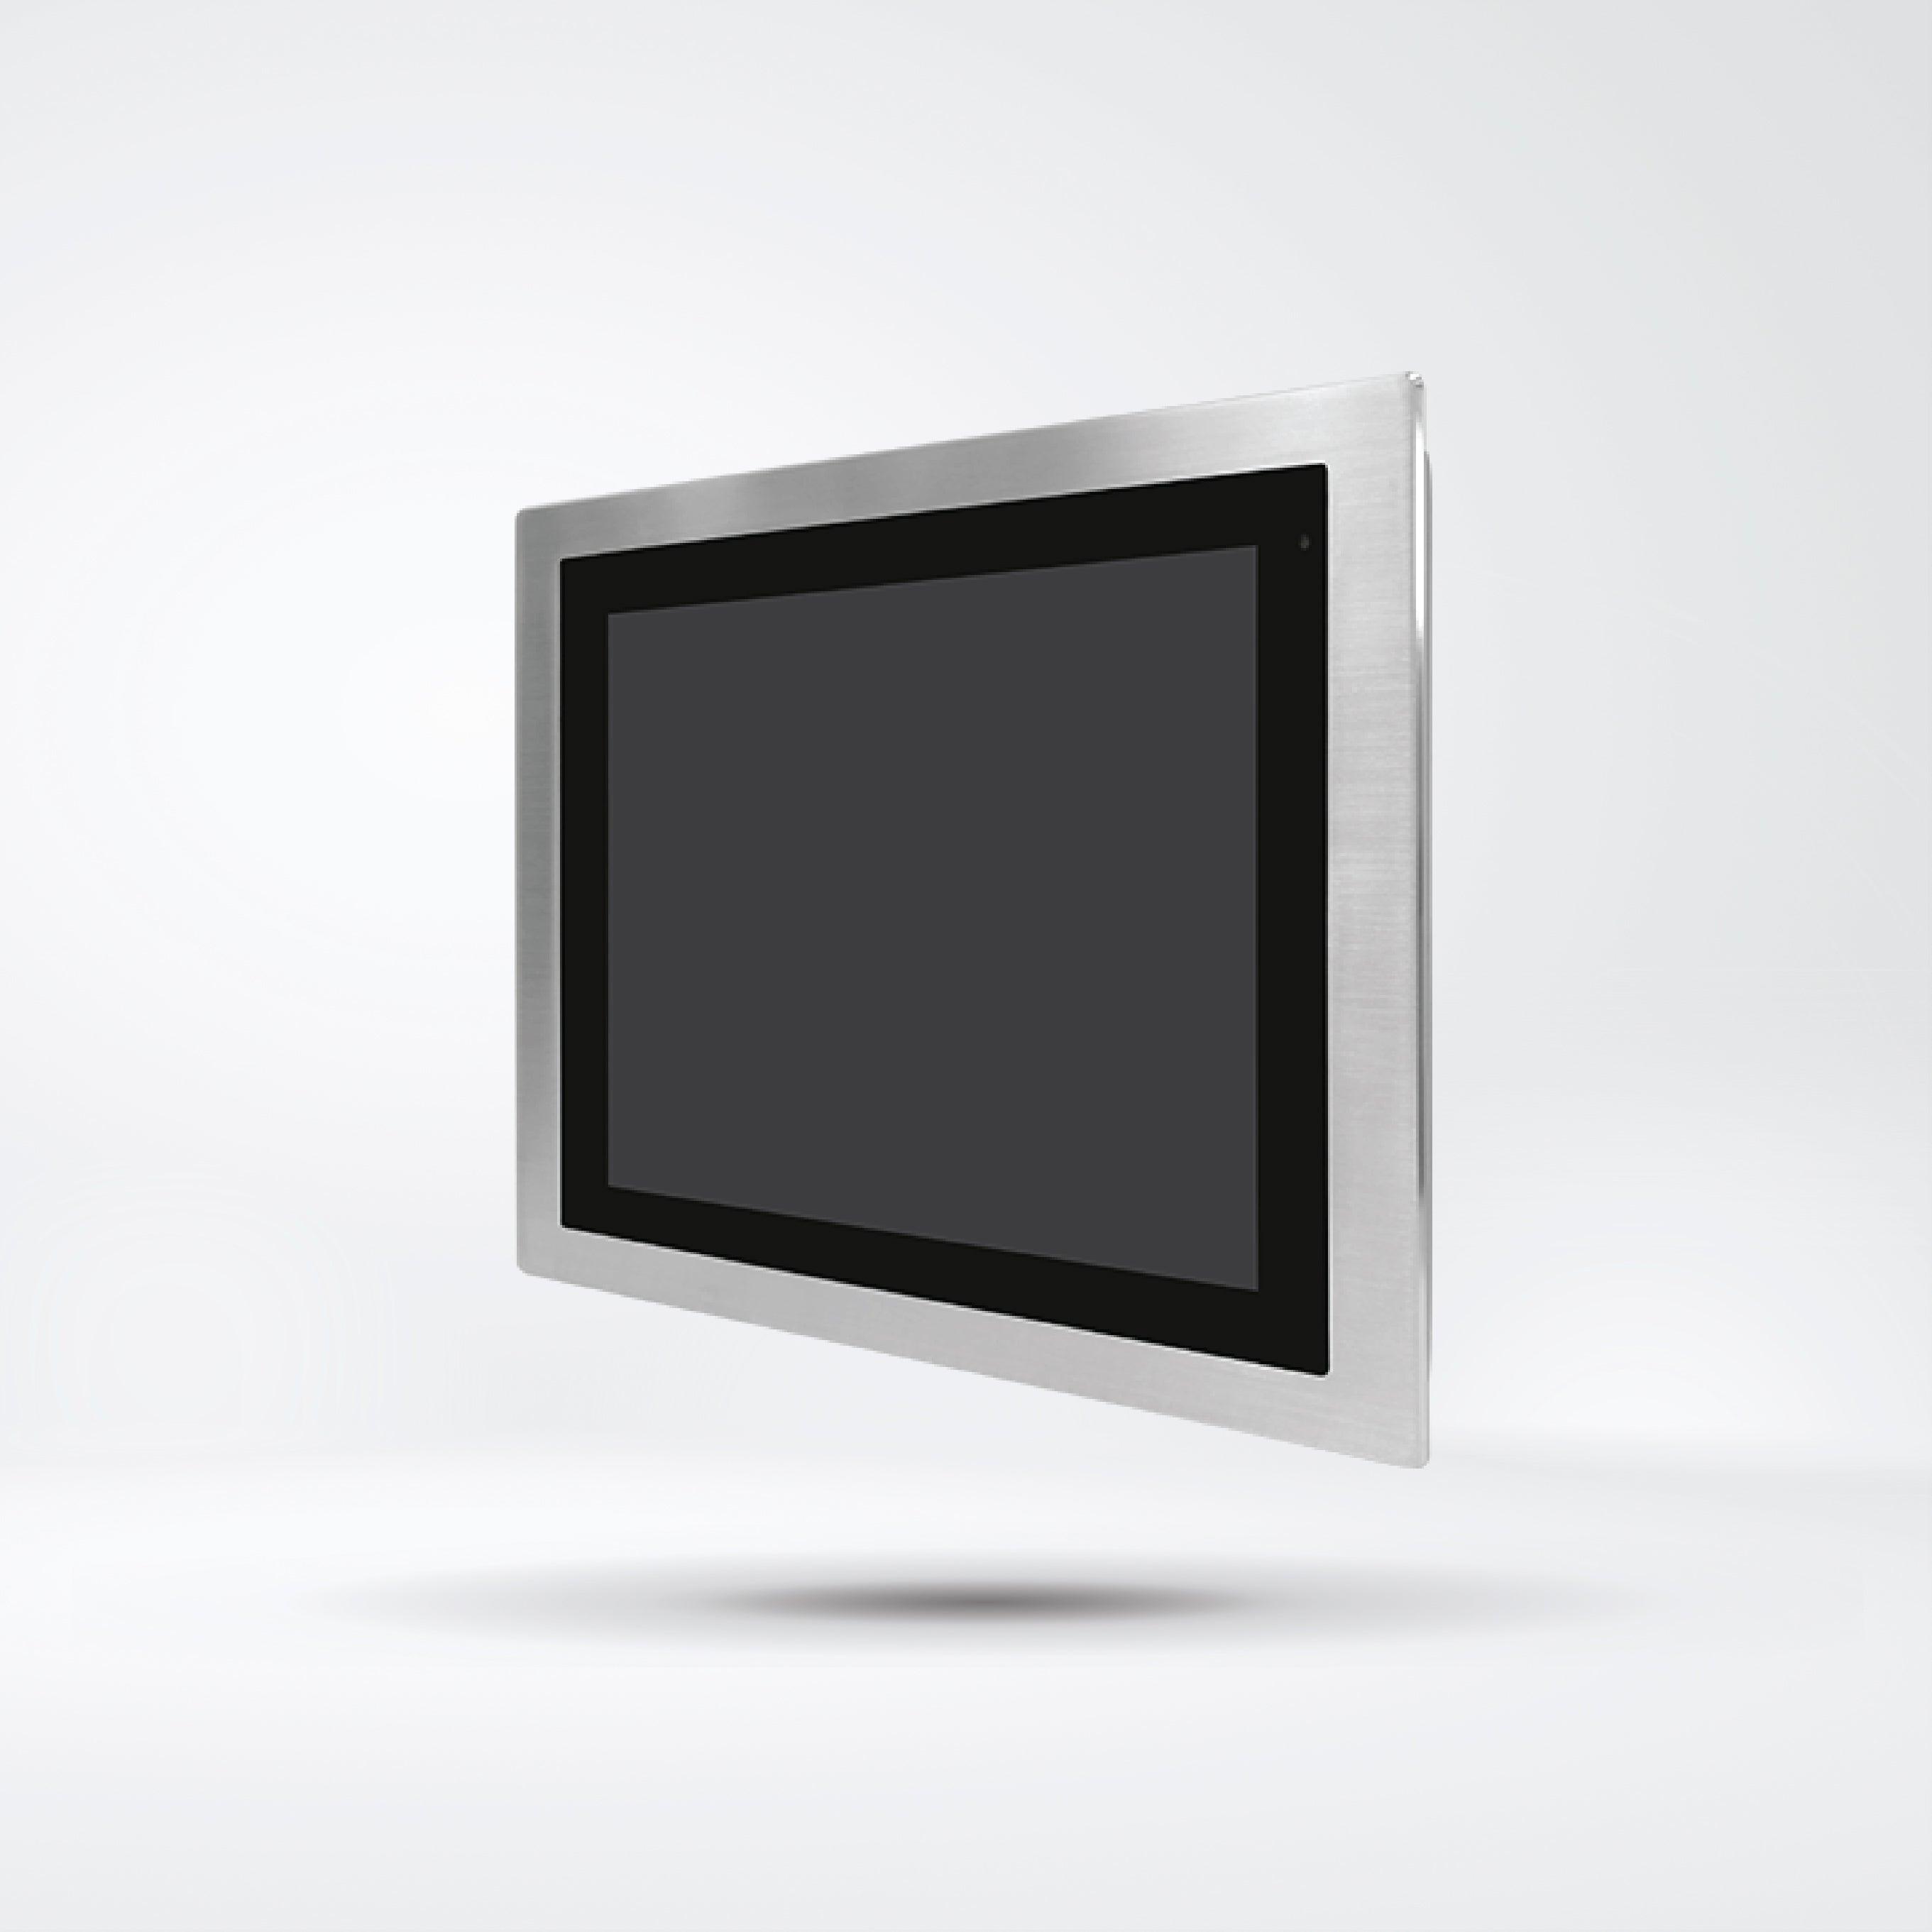 FABS-115PH 15” Flat Front Panel IP66 Stainless Chassis Display - Riverplus